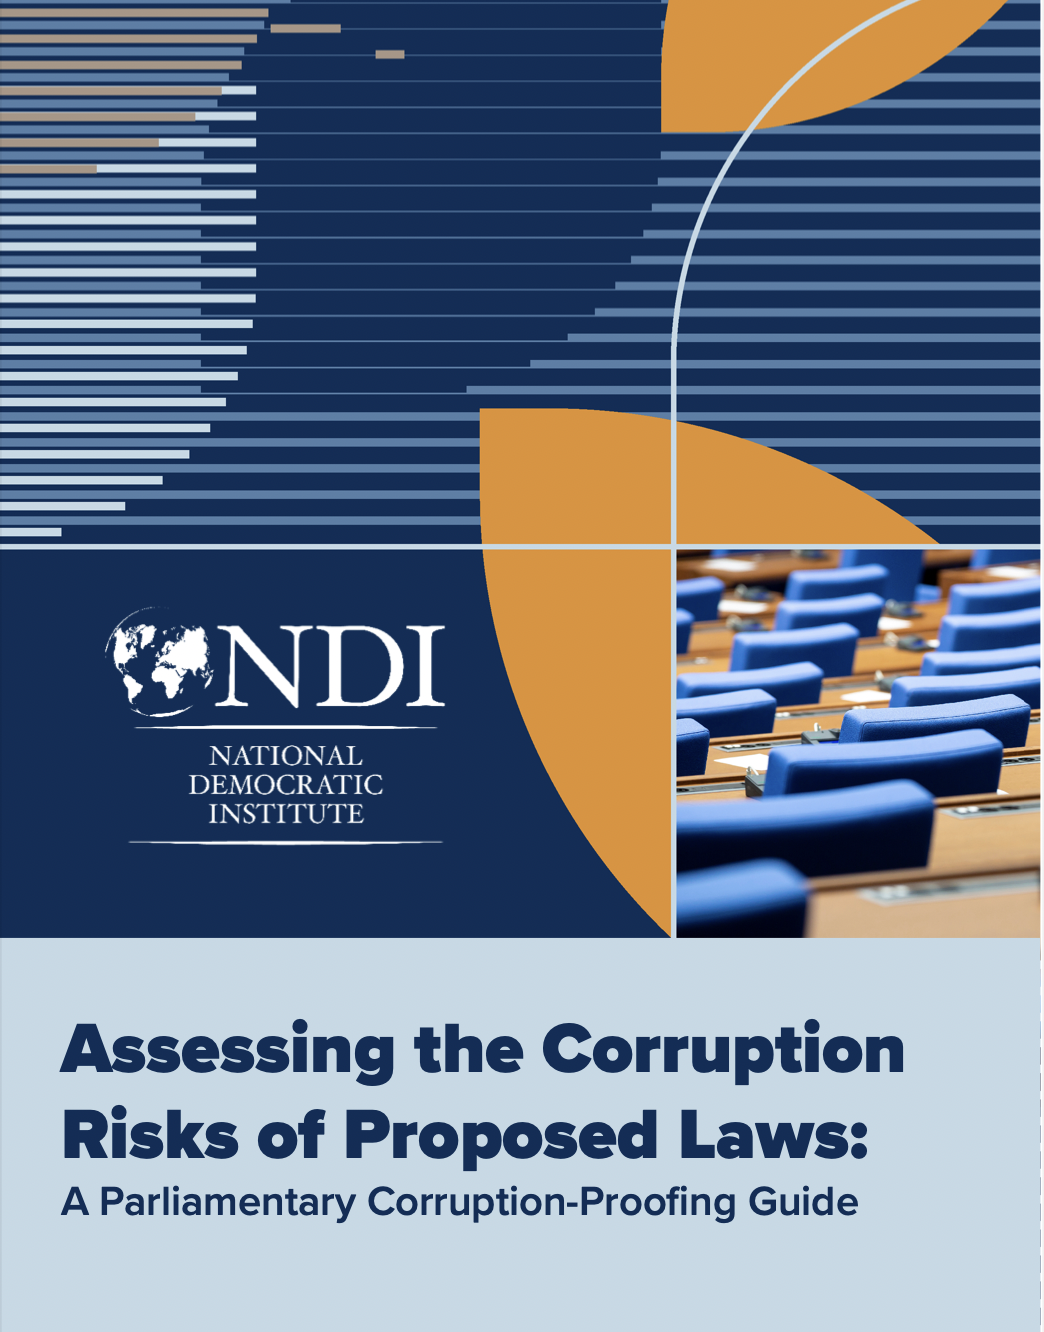 Assessing the Corruption Risks of Proposed Laws: A Parliamentary Corruption-Proofing Guide